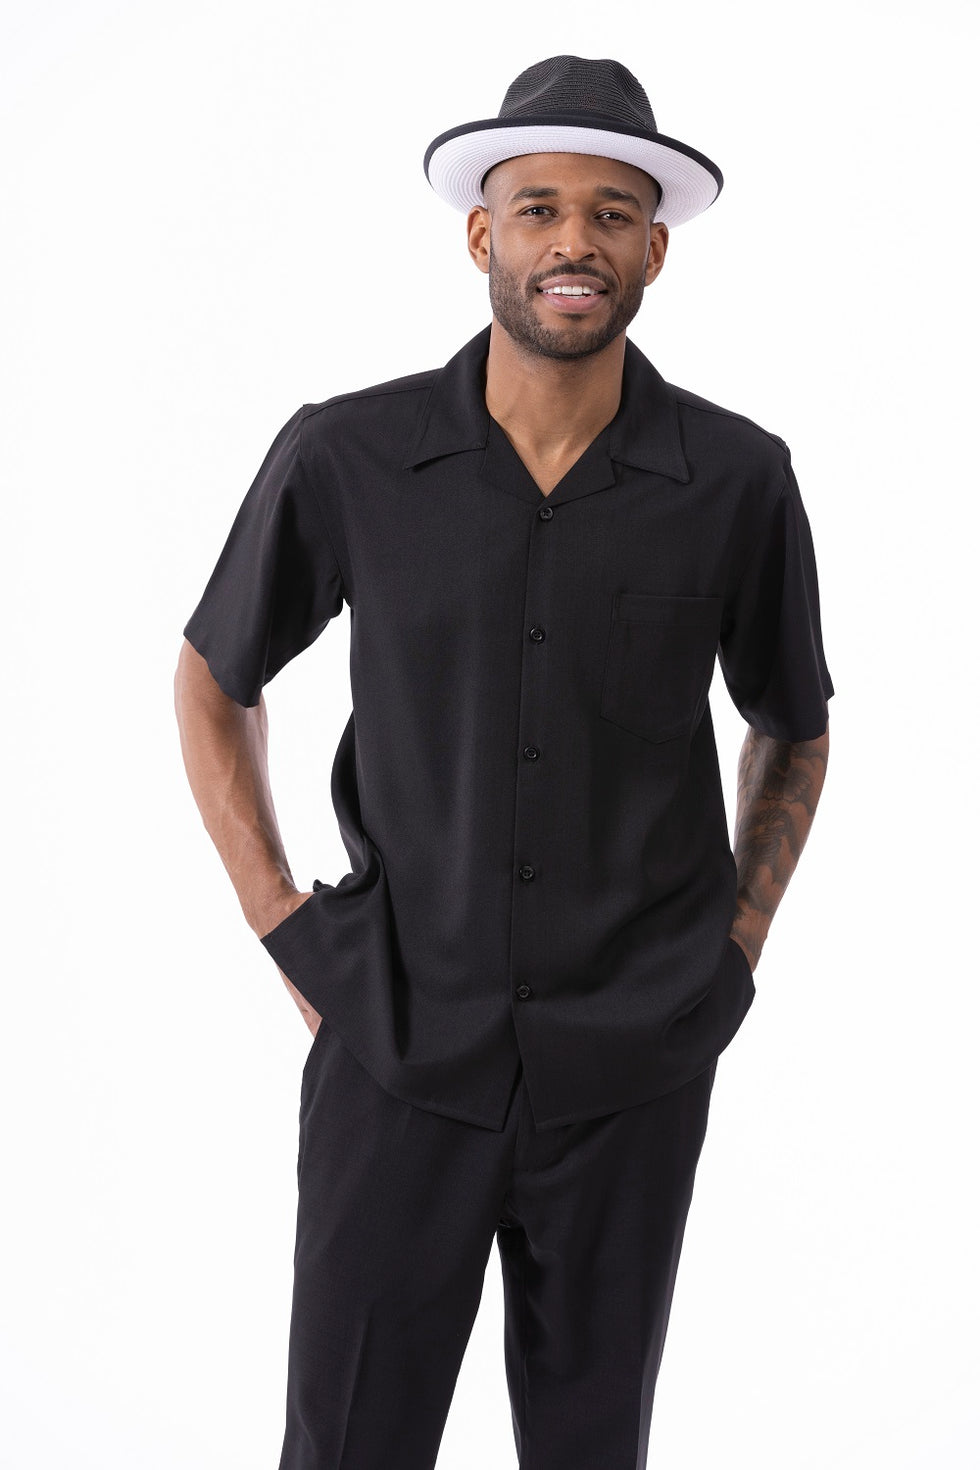 Short Sleeve Suit for Men | Walking Suit with Short Sleeve Shirt ...